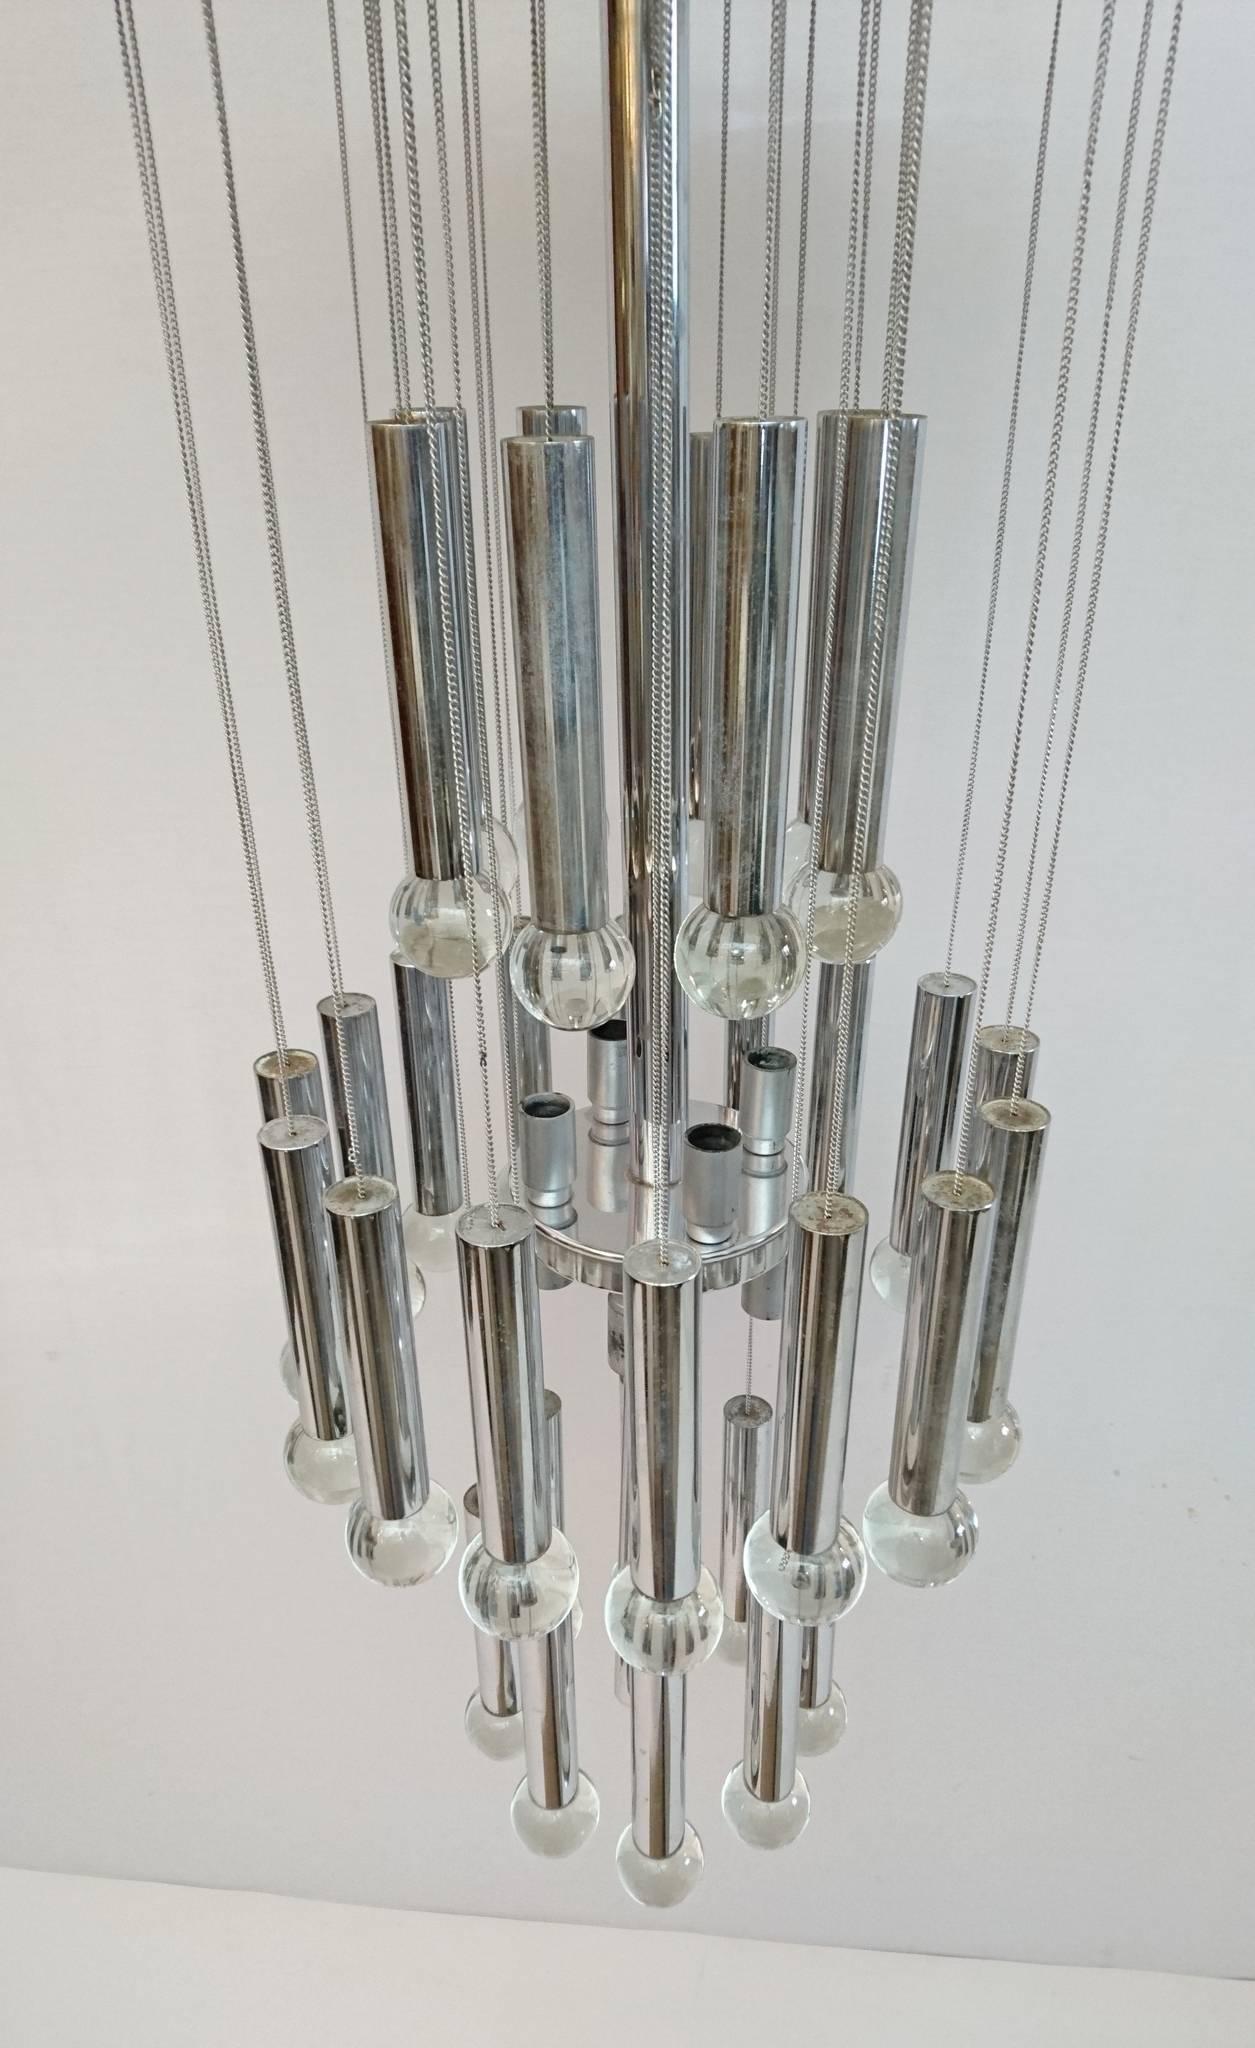 Slender chandelier by Gaetano Sciolari with 32 solid glass balls hanging in chains. All in chrome and made for nine-light bulbs.